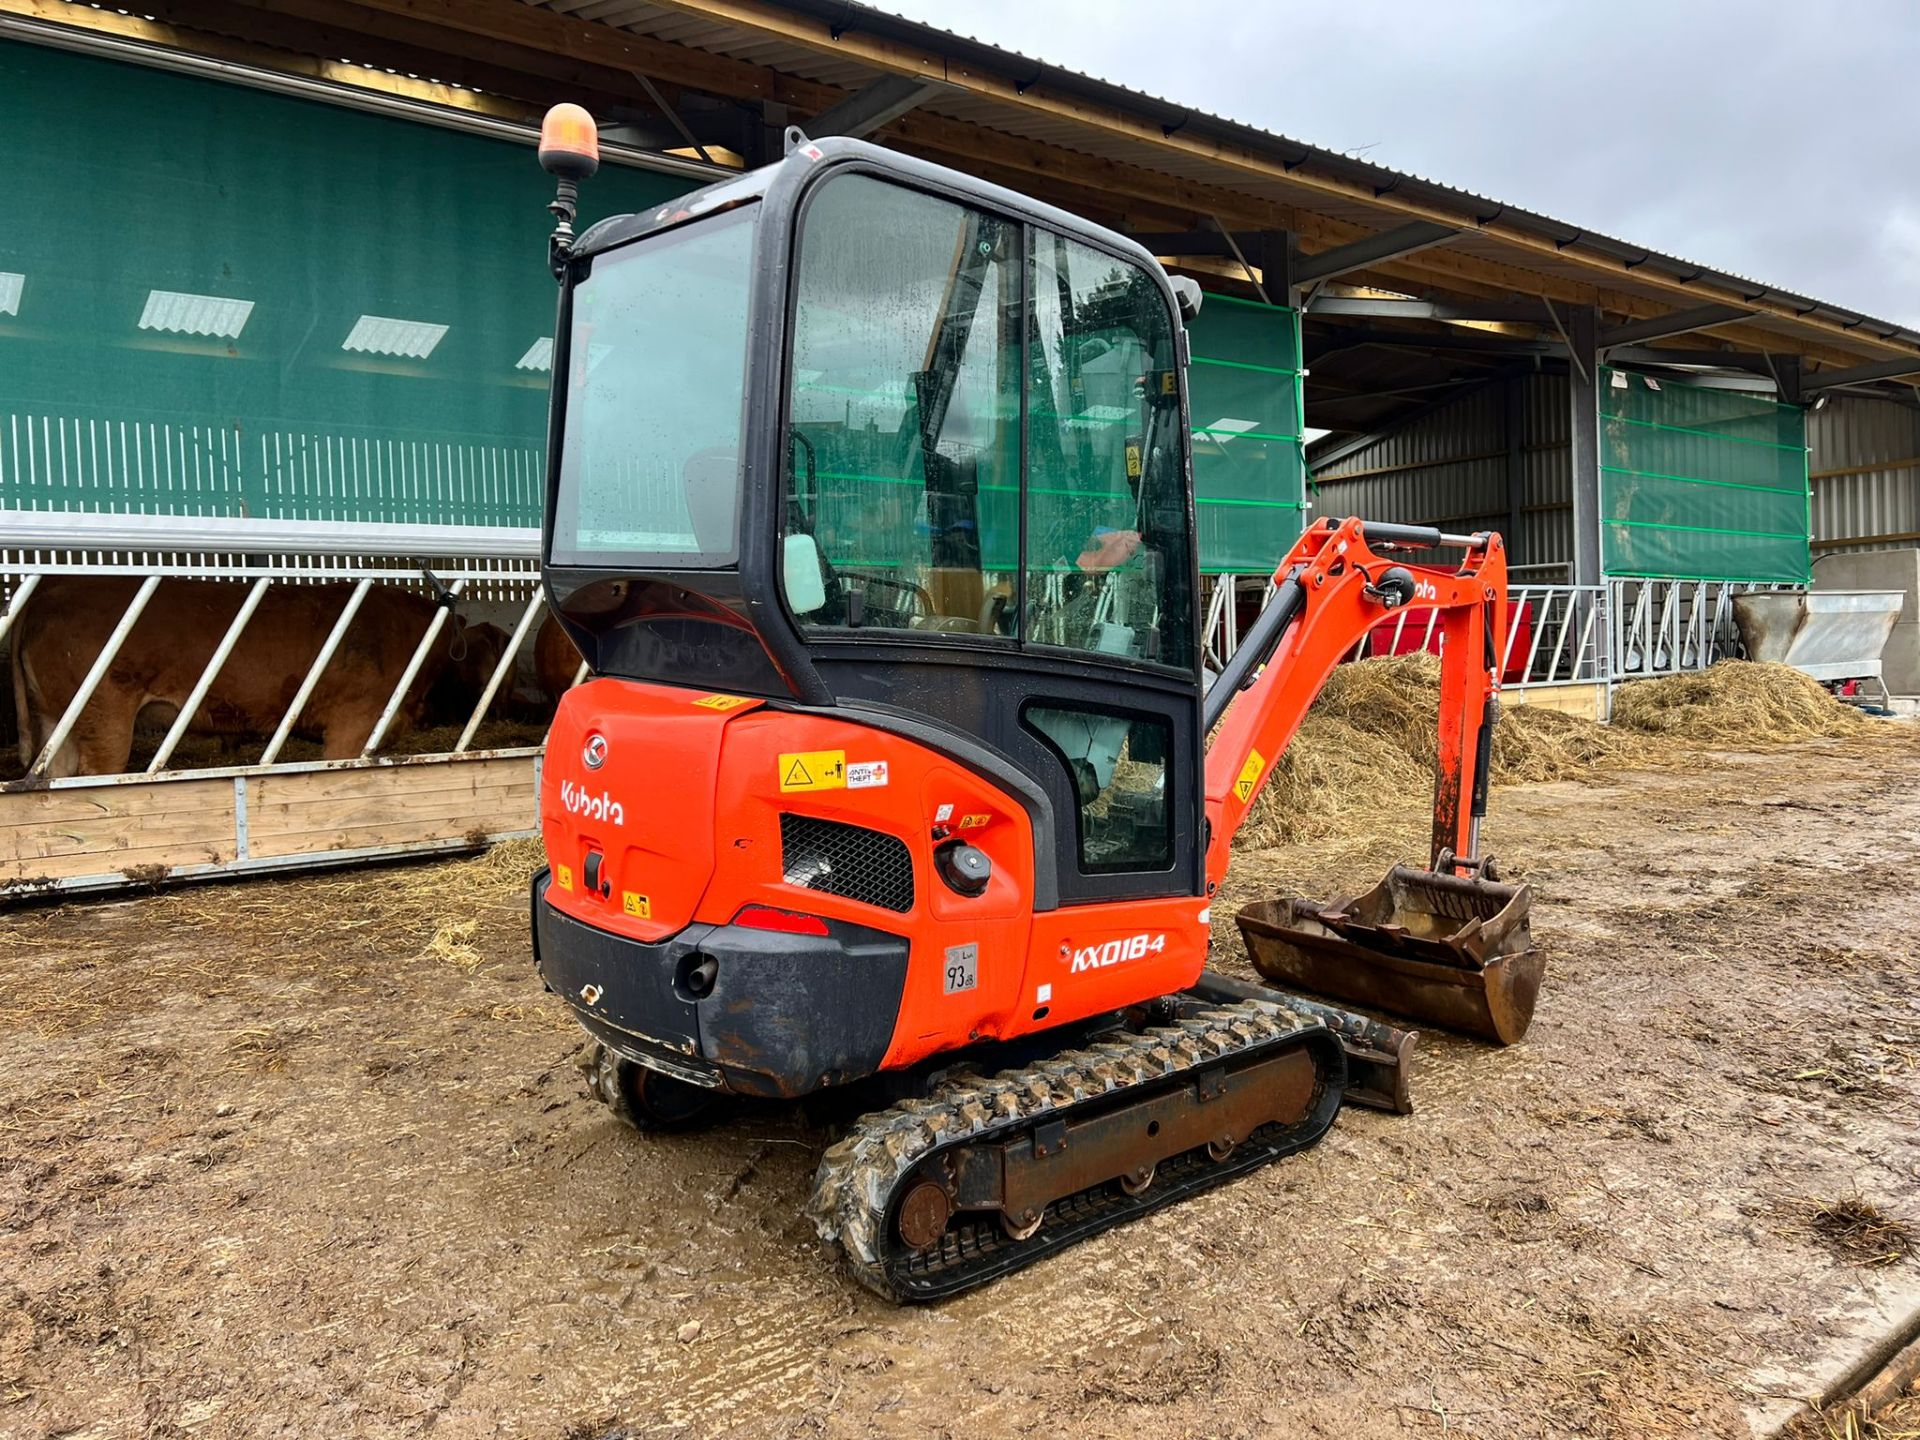 2018 KUBOTA KX018-4 1.8 TON MINI DIGGER, RUNS DRIVES AND DIGS, SHOWING A LOW 1681 HOURS - Image 6 of 20